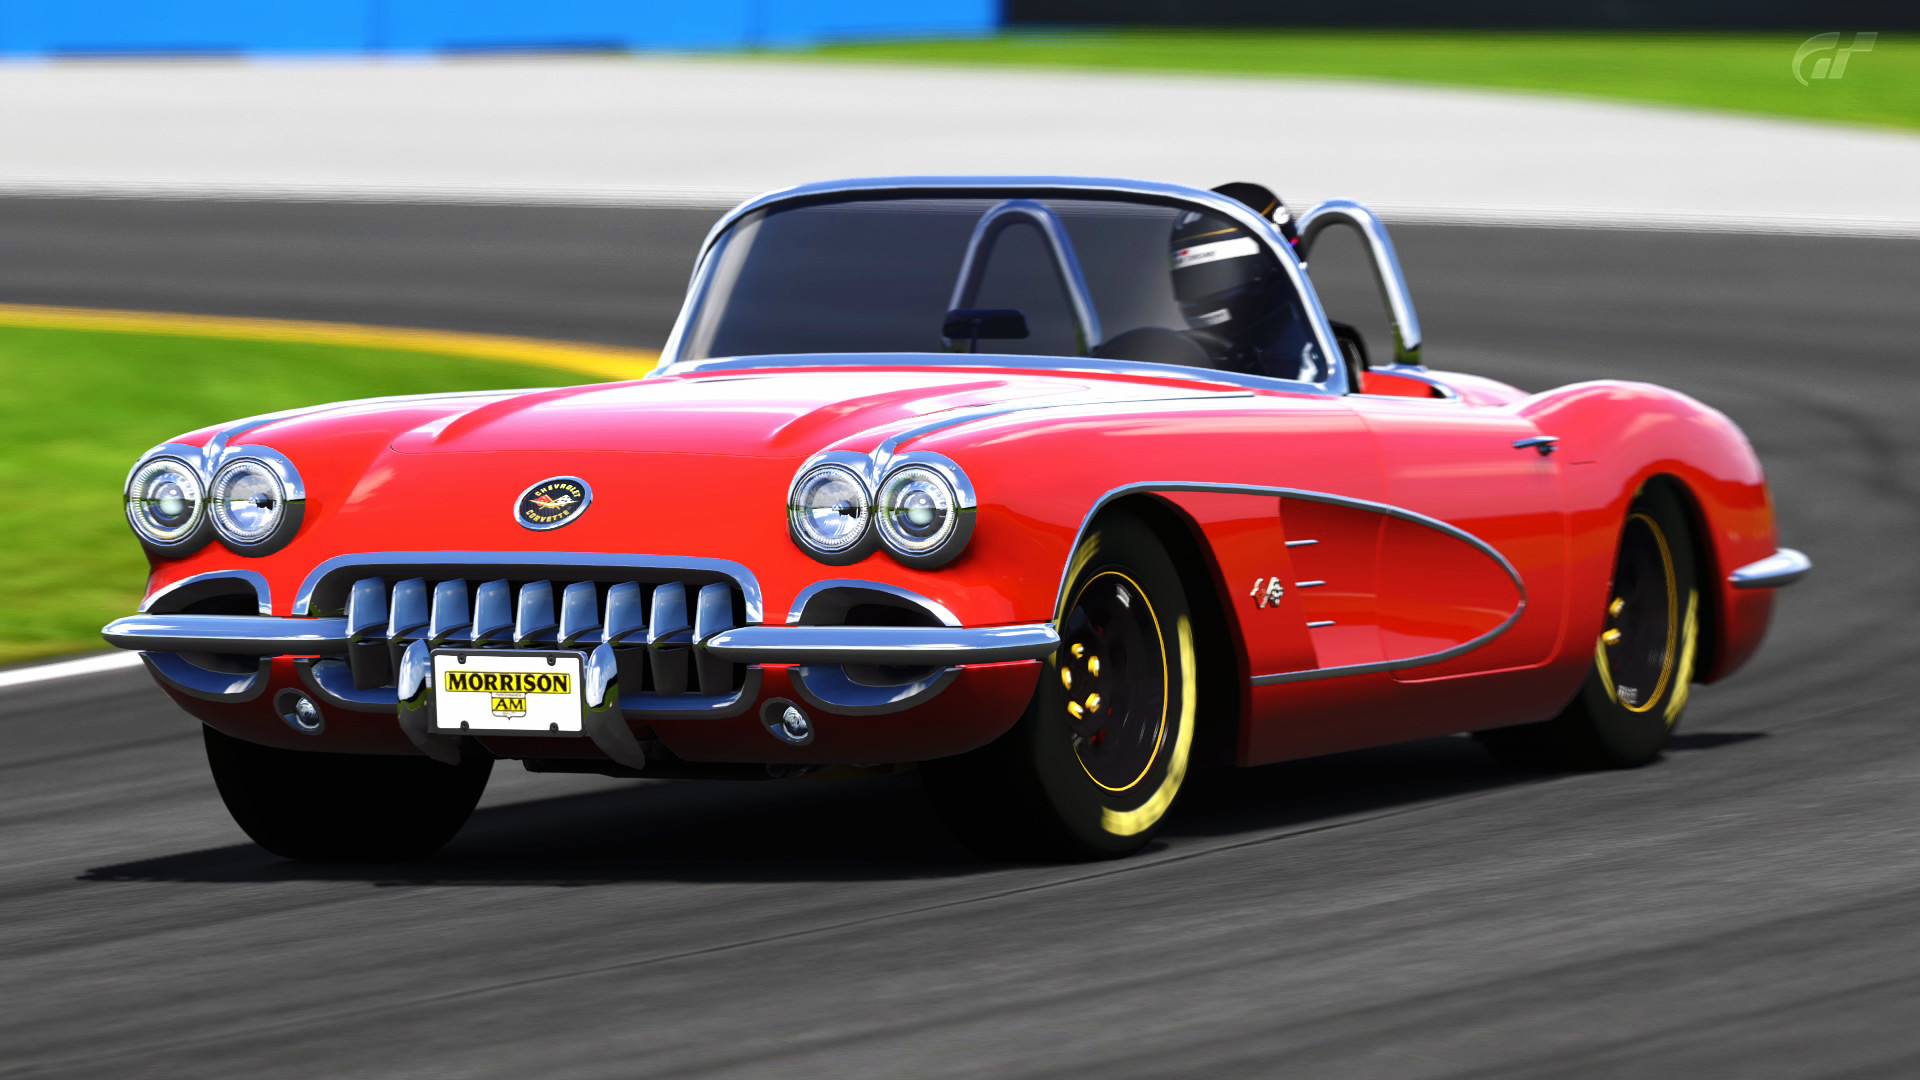 1920x1080 1960 ART Morrison Corvette 1960 ART Morrison Corvette (Gran Turismo 5) by  Vertualissimo on